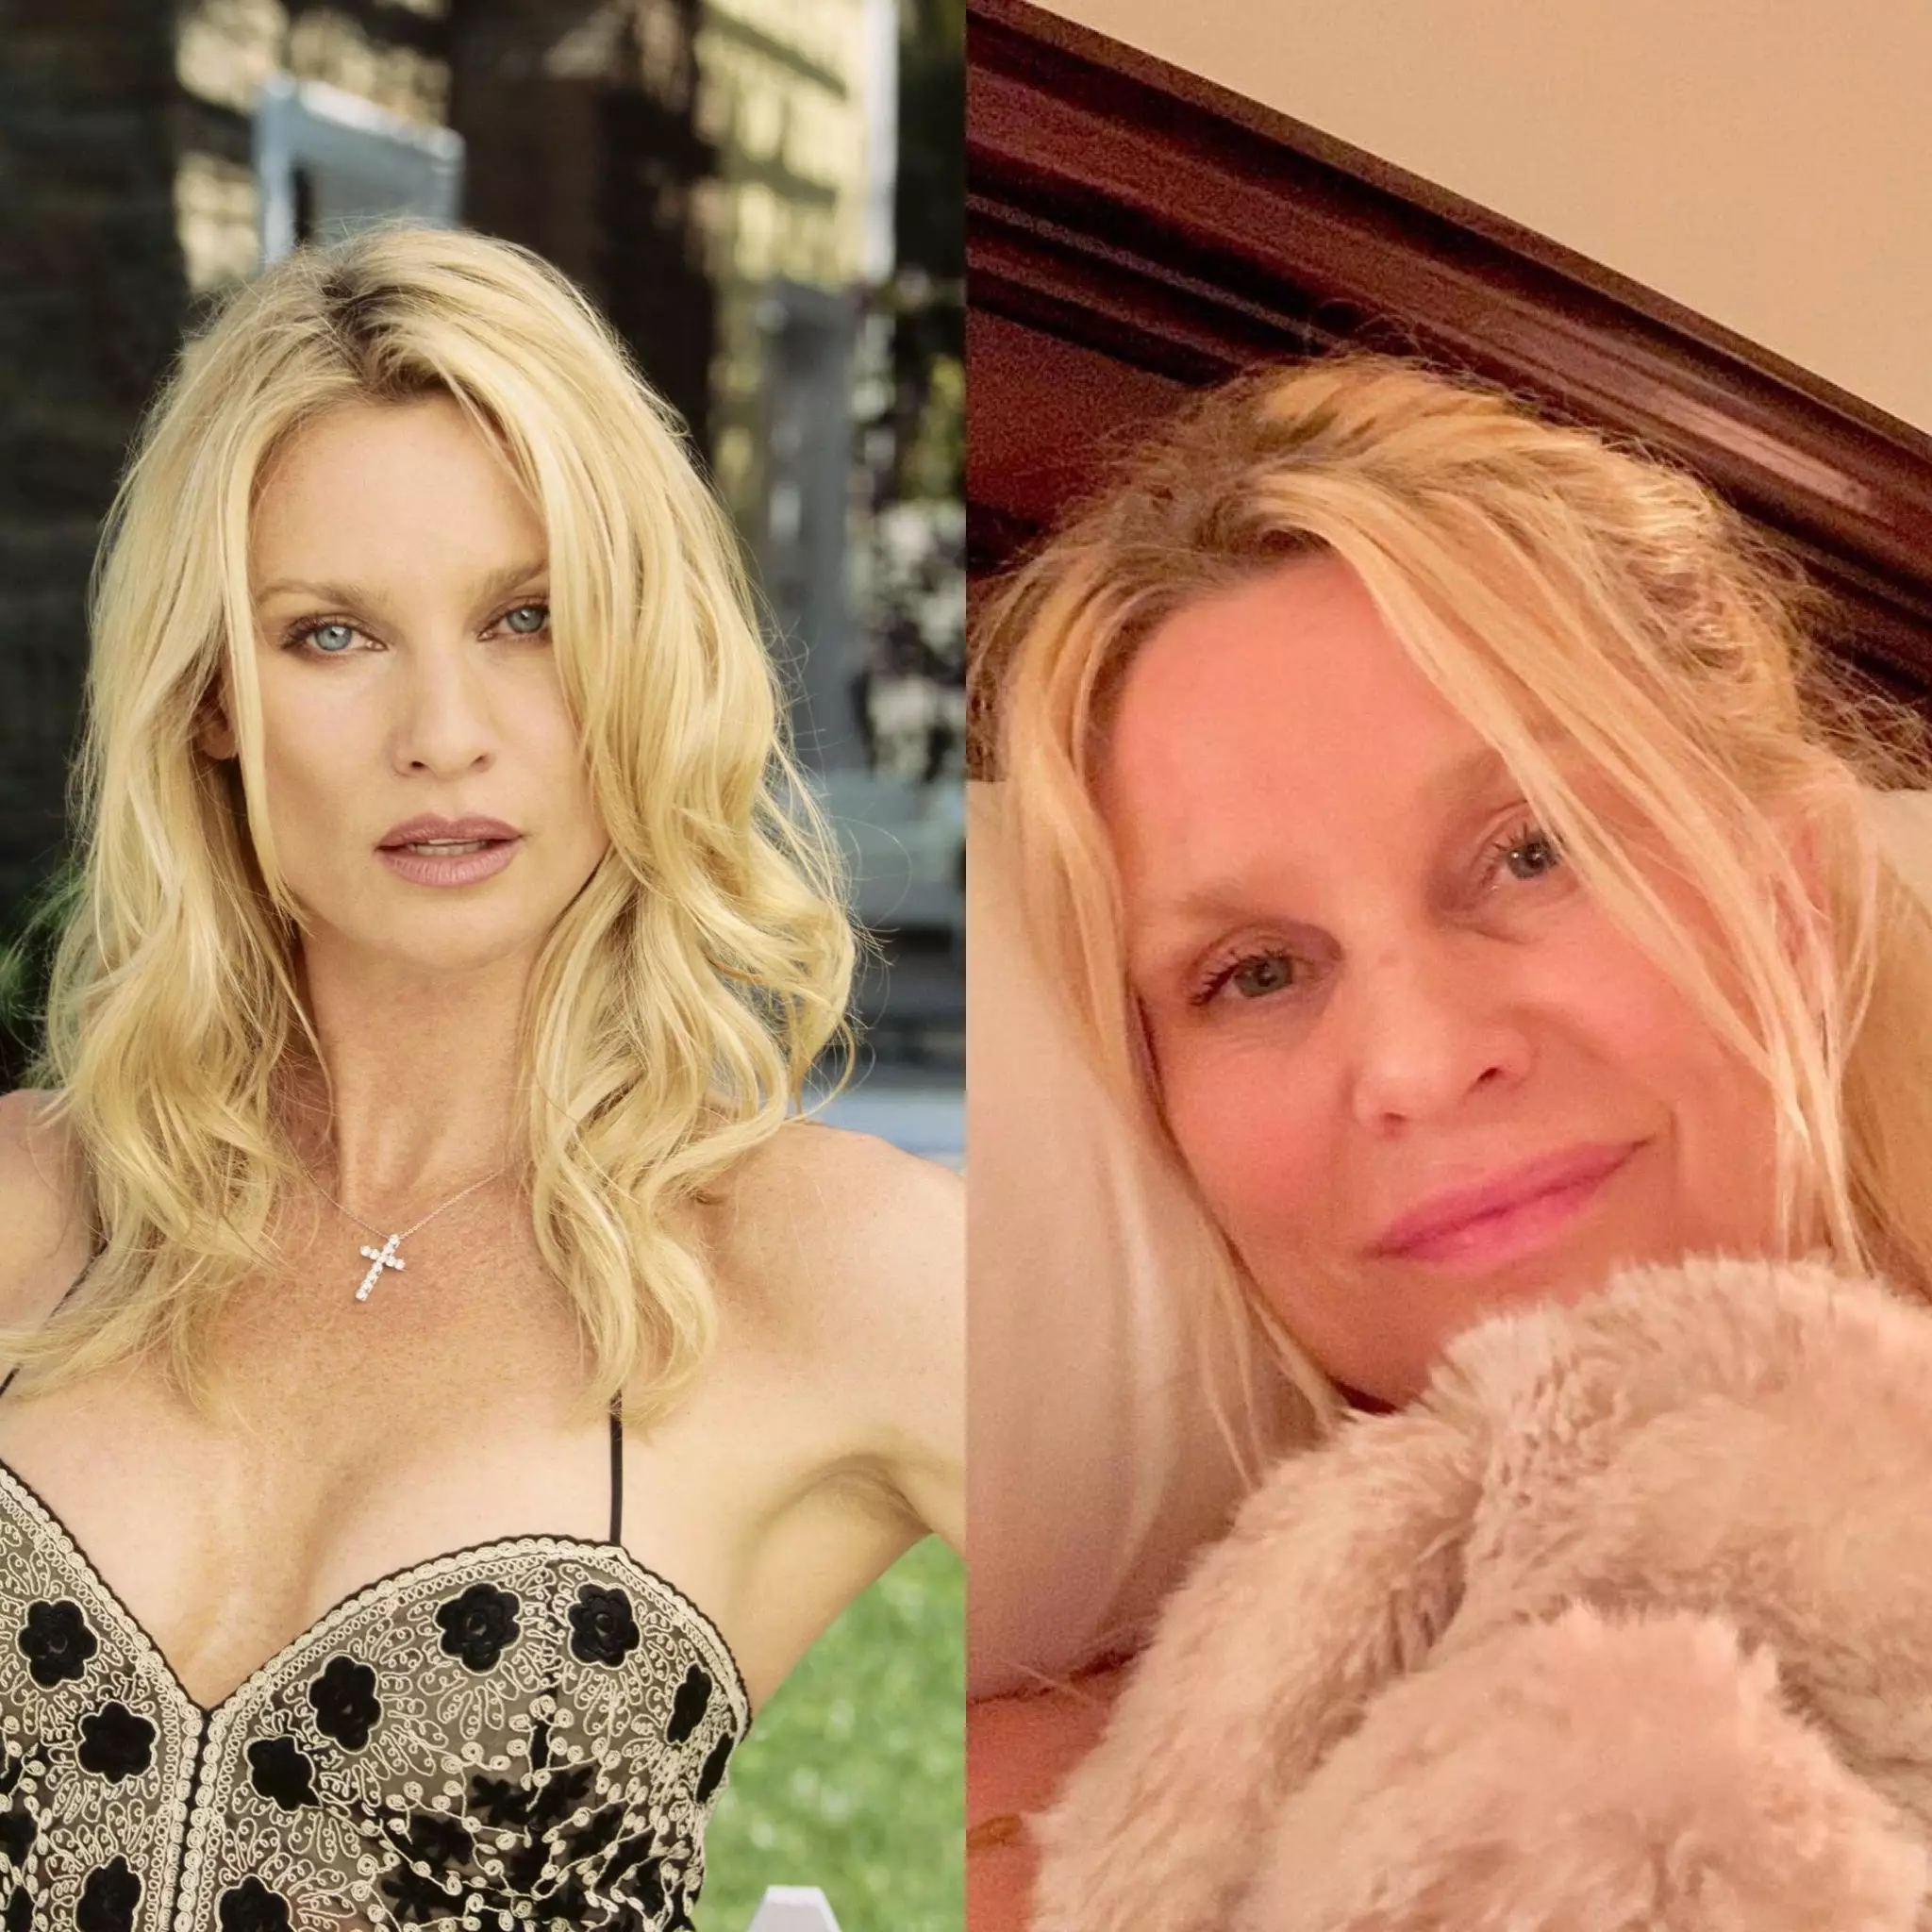 Nicolette Sheridan filed a $20 million lawsuit against the producer Marc Cherry (